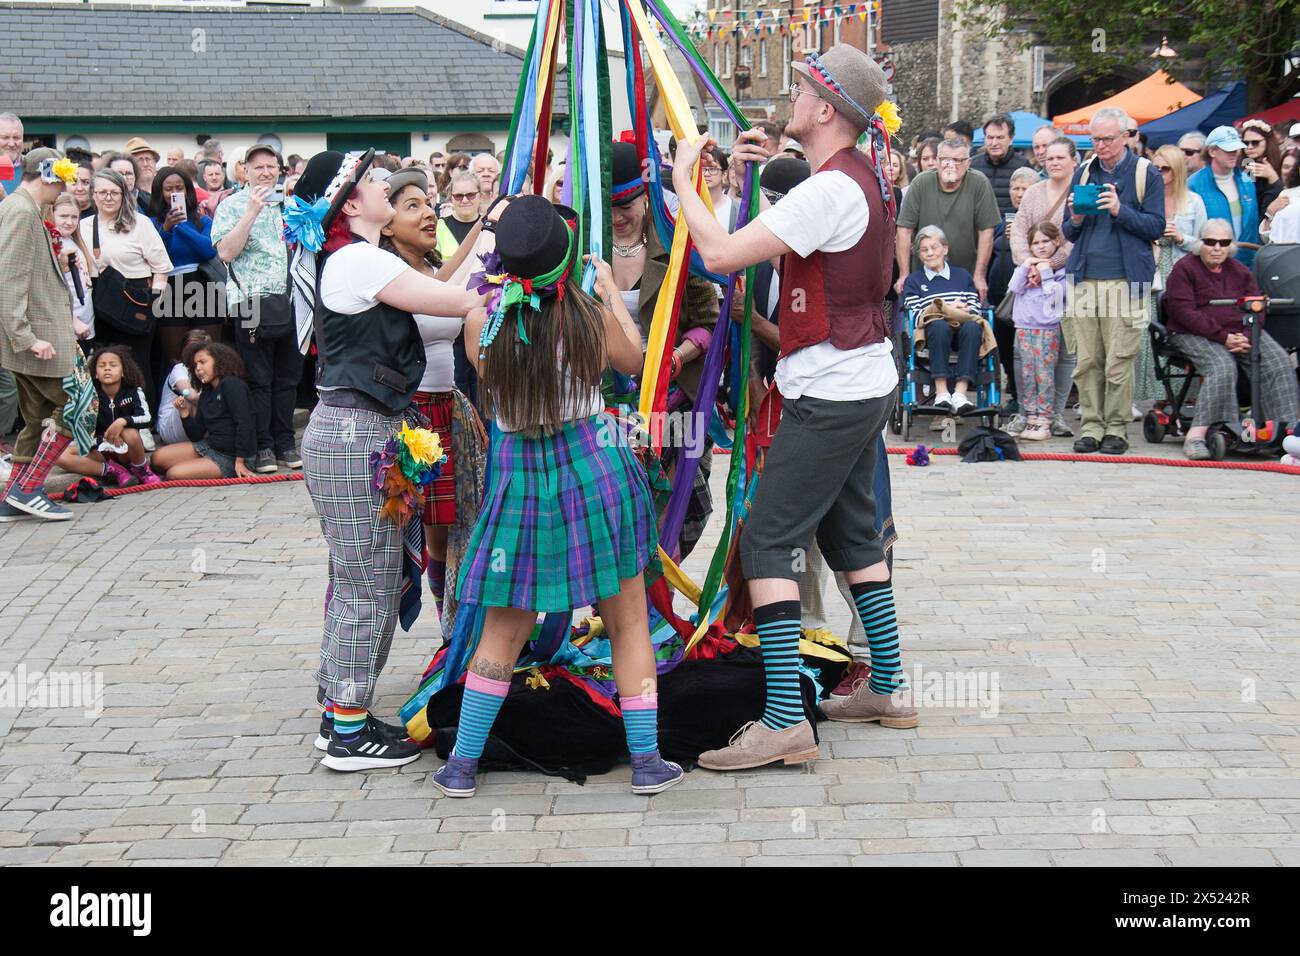 Folkdance Remixed Sweeps Festival Rochester Kent Banque D'Images